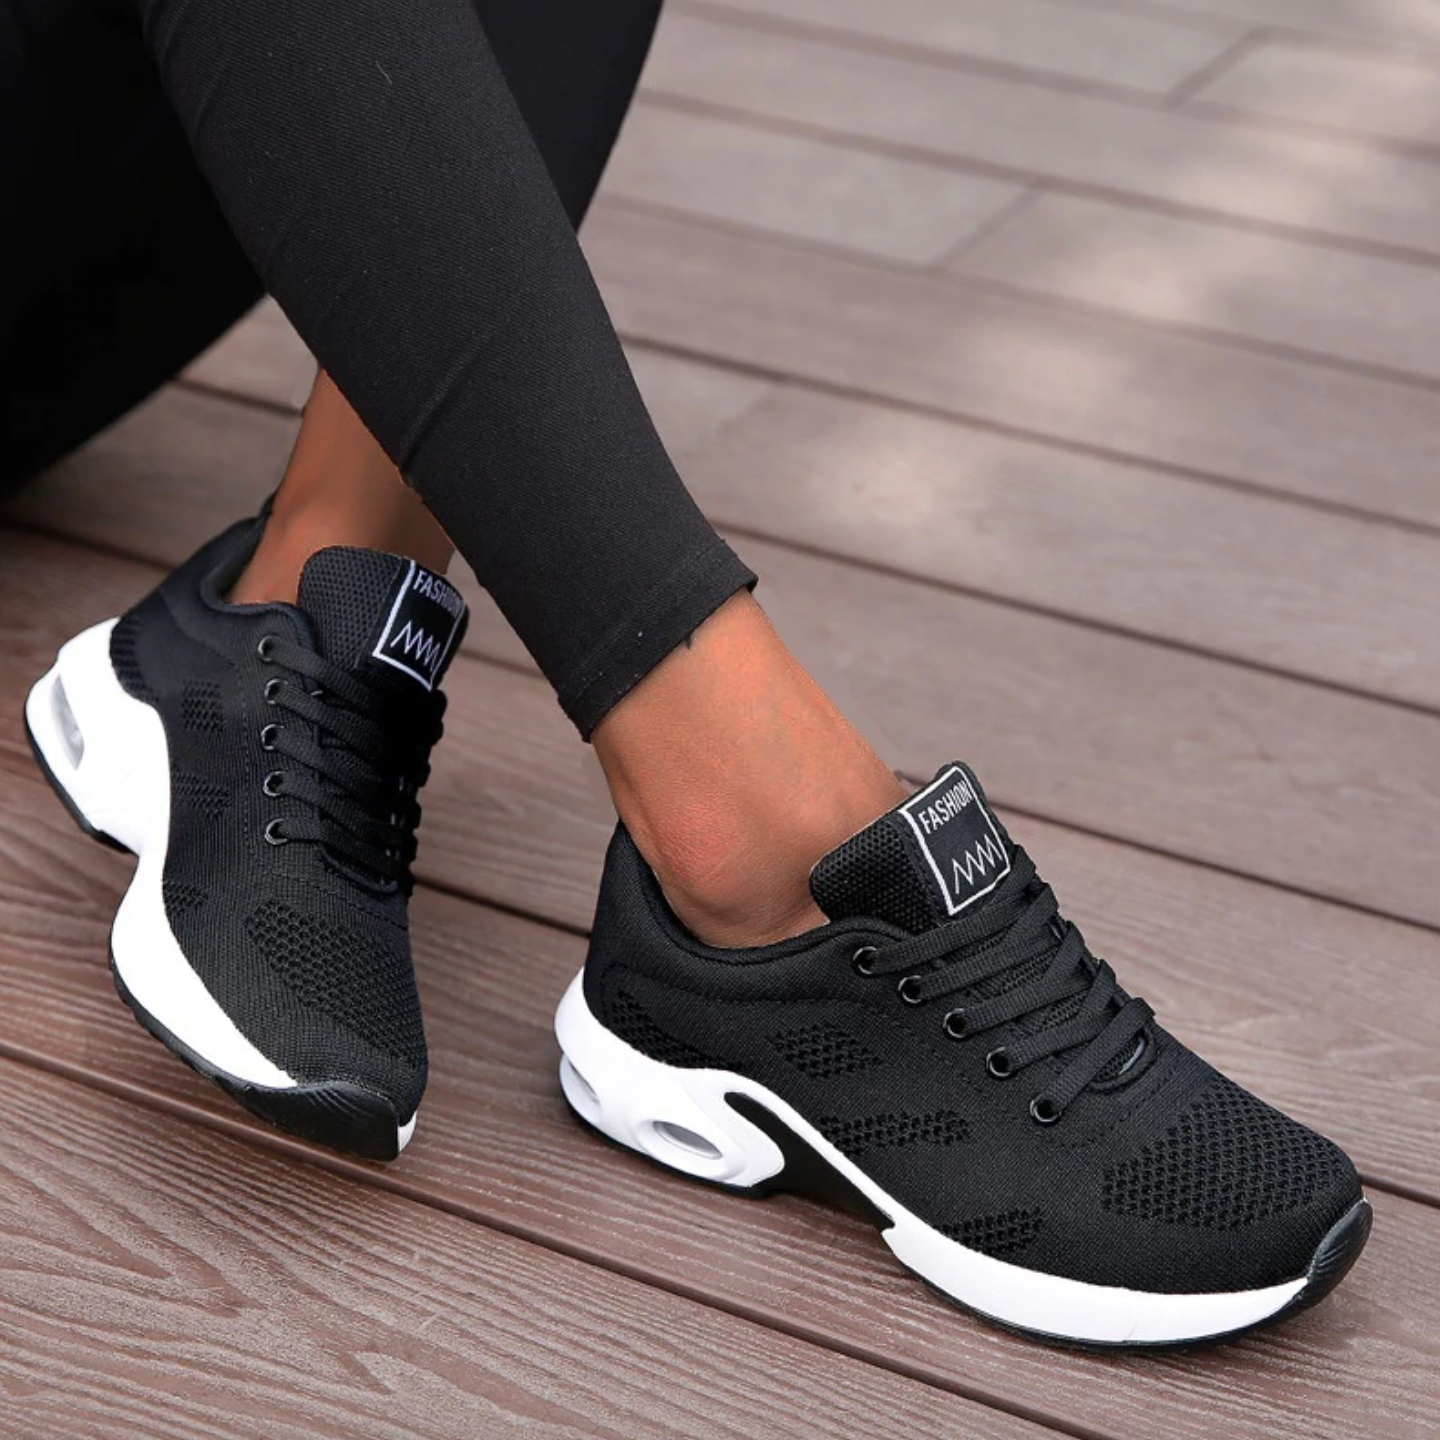 🔥On This Week Sale Off 50%🔥 Women Orthopedic Corrector Lightweight Running Breathable Sneakers